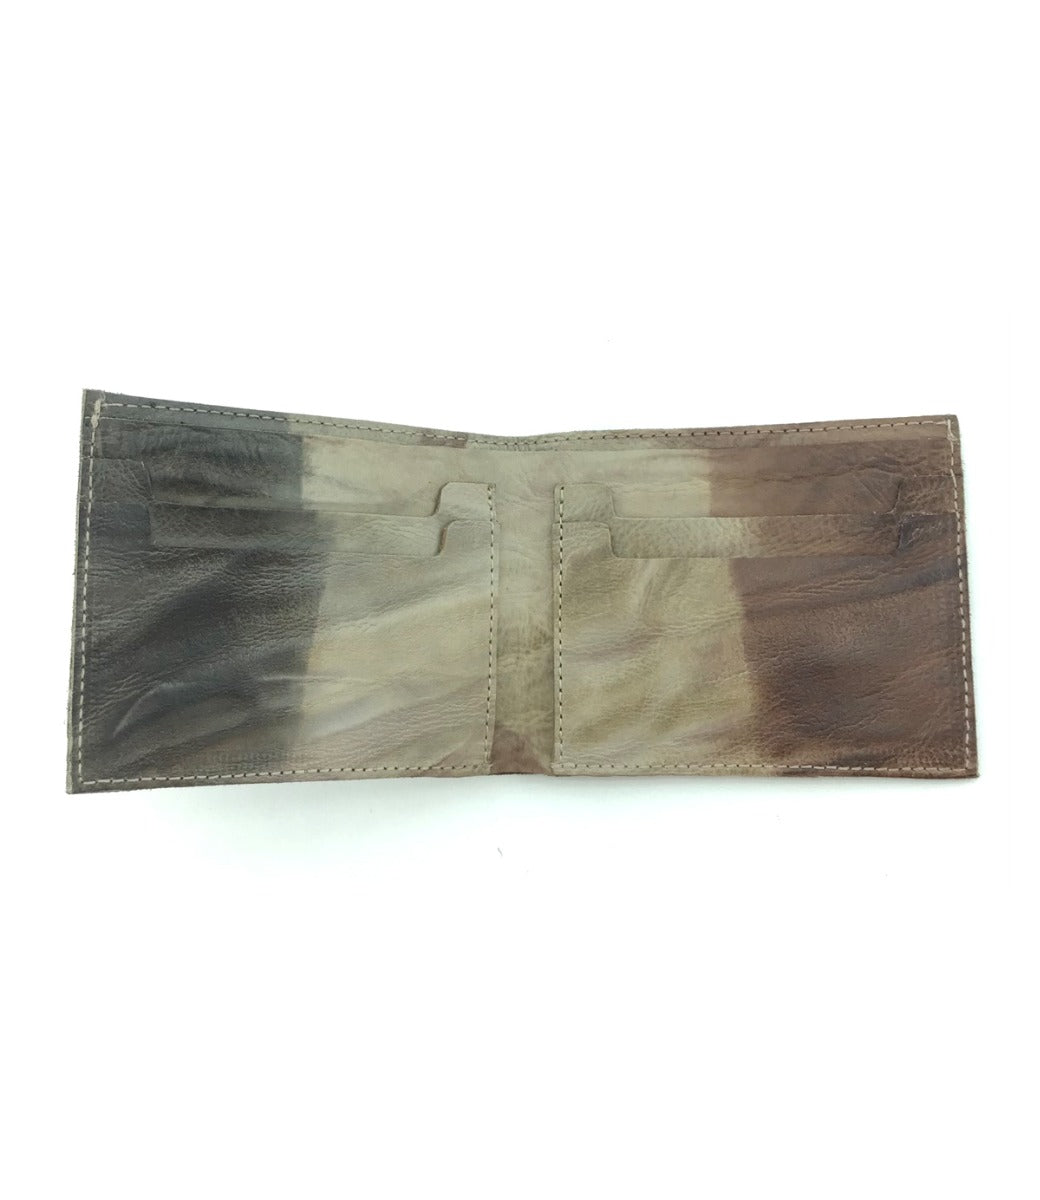 A Amidala wallet with a brown and black color by Bed Stu.